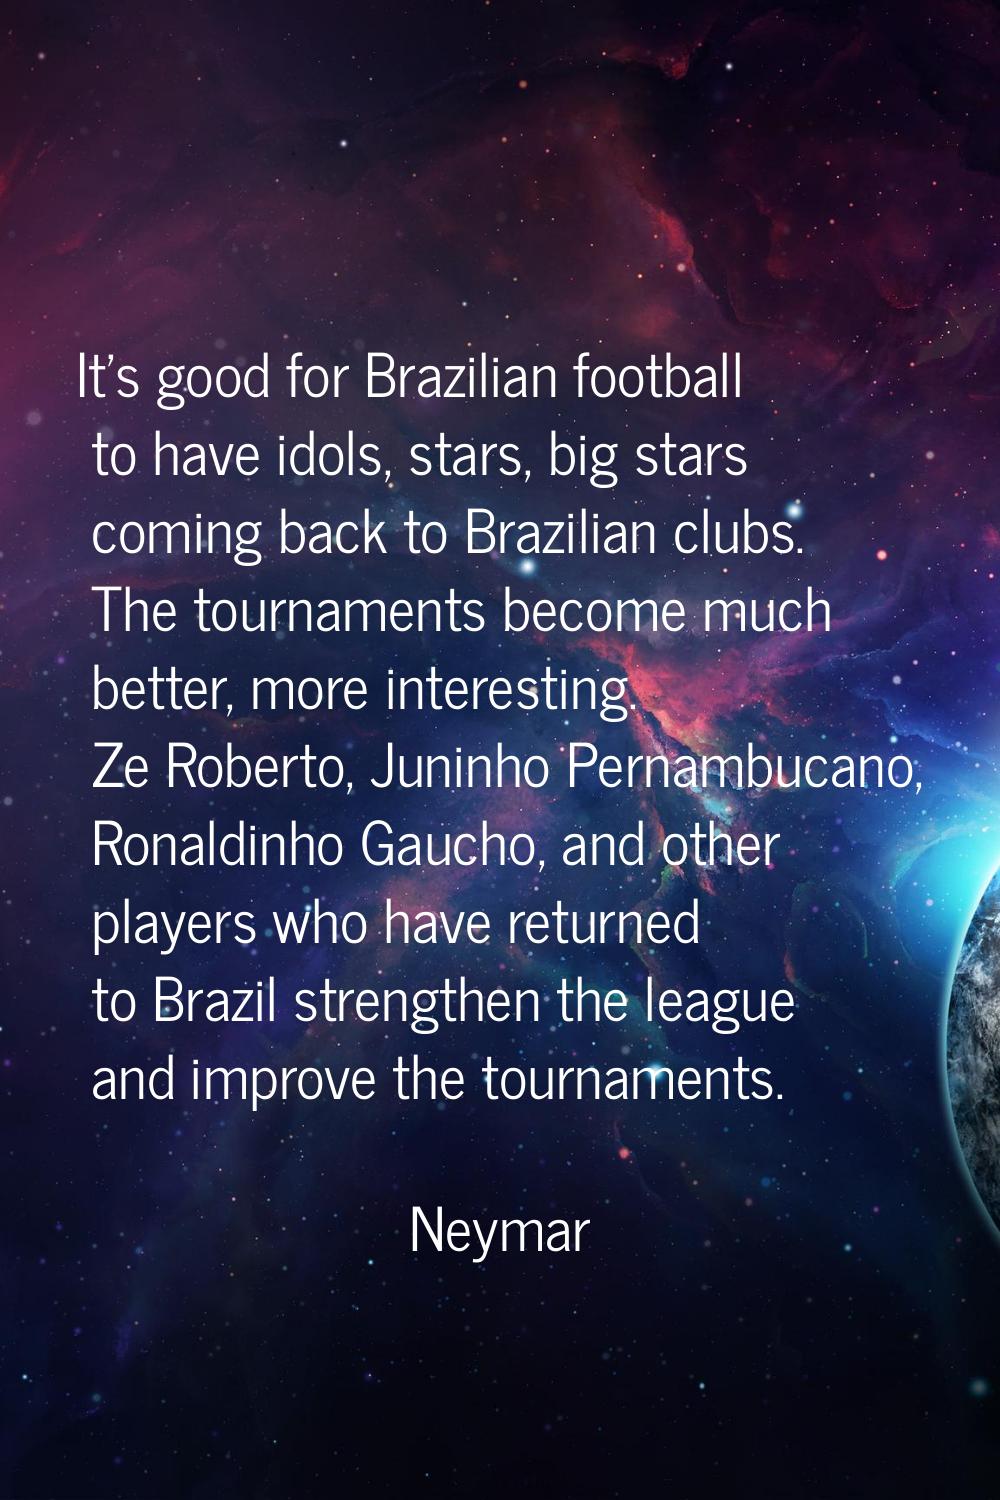 It's good for Brazilian football to have idols, stars, big stars coming back to Brazilian clubs. Th